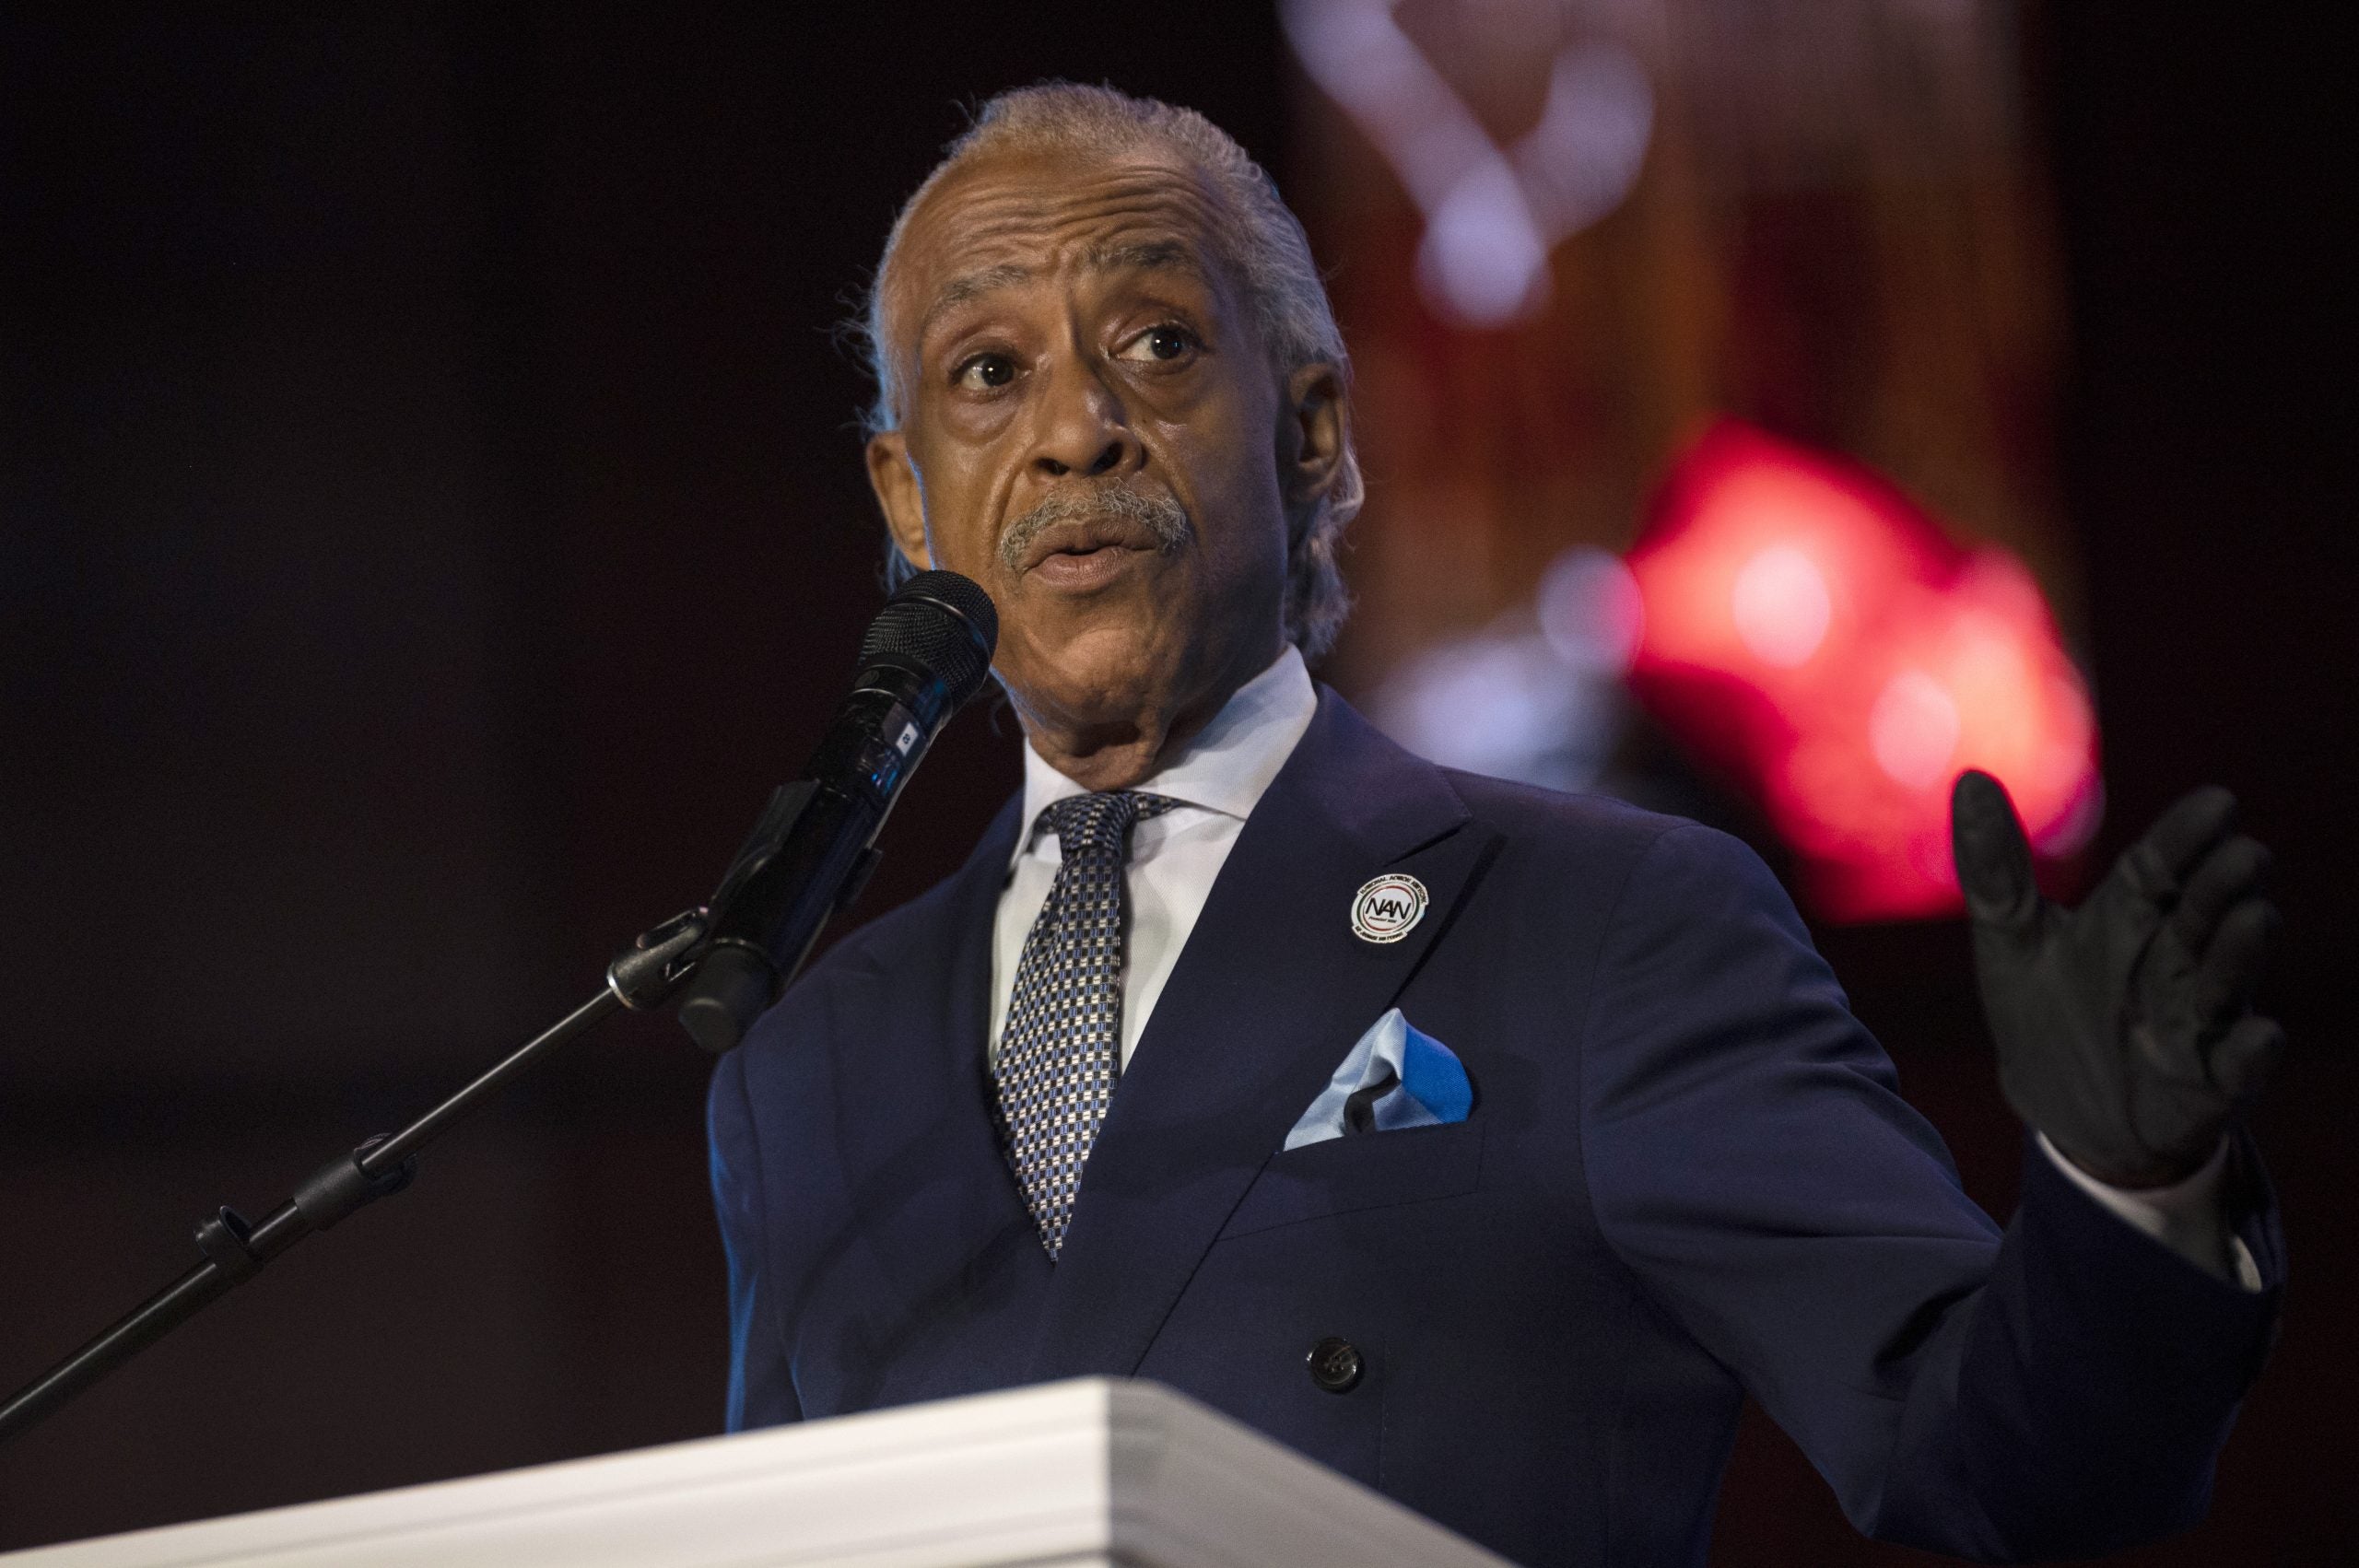 Rev. Al Sharpton Says It's Time To Recommit To The Strength Of Black Women